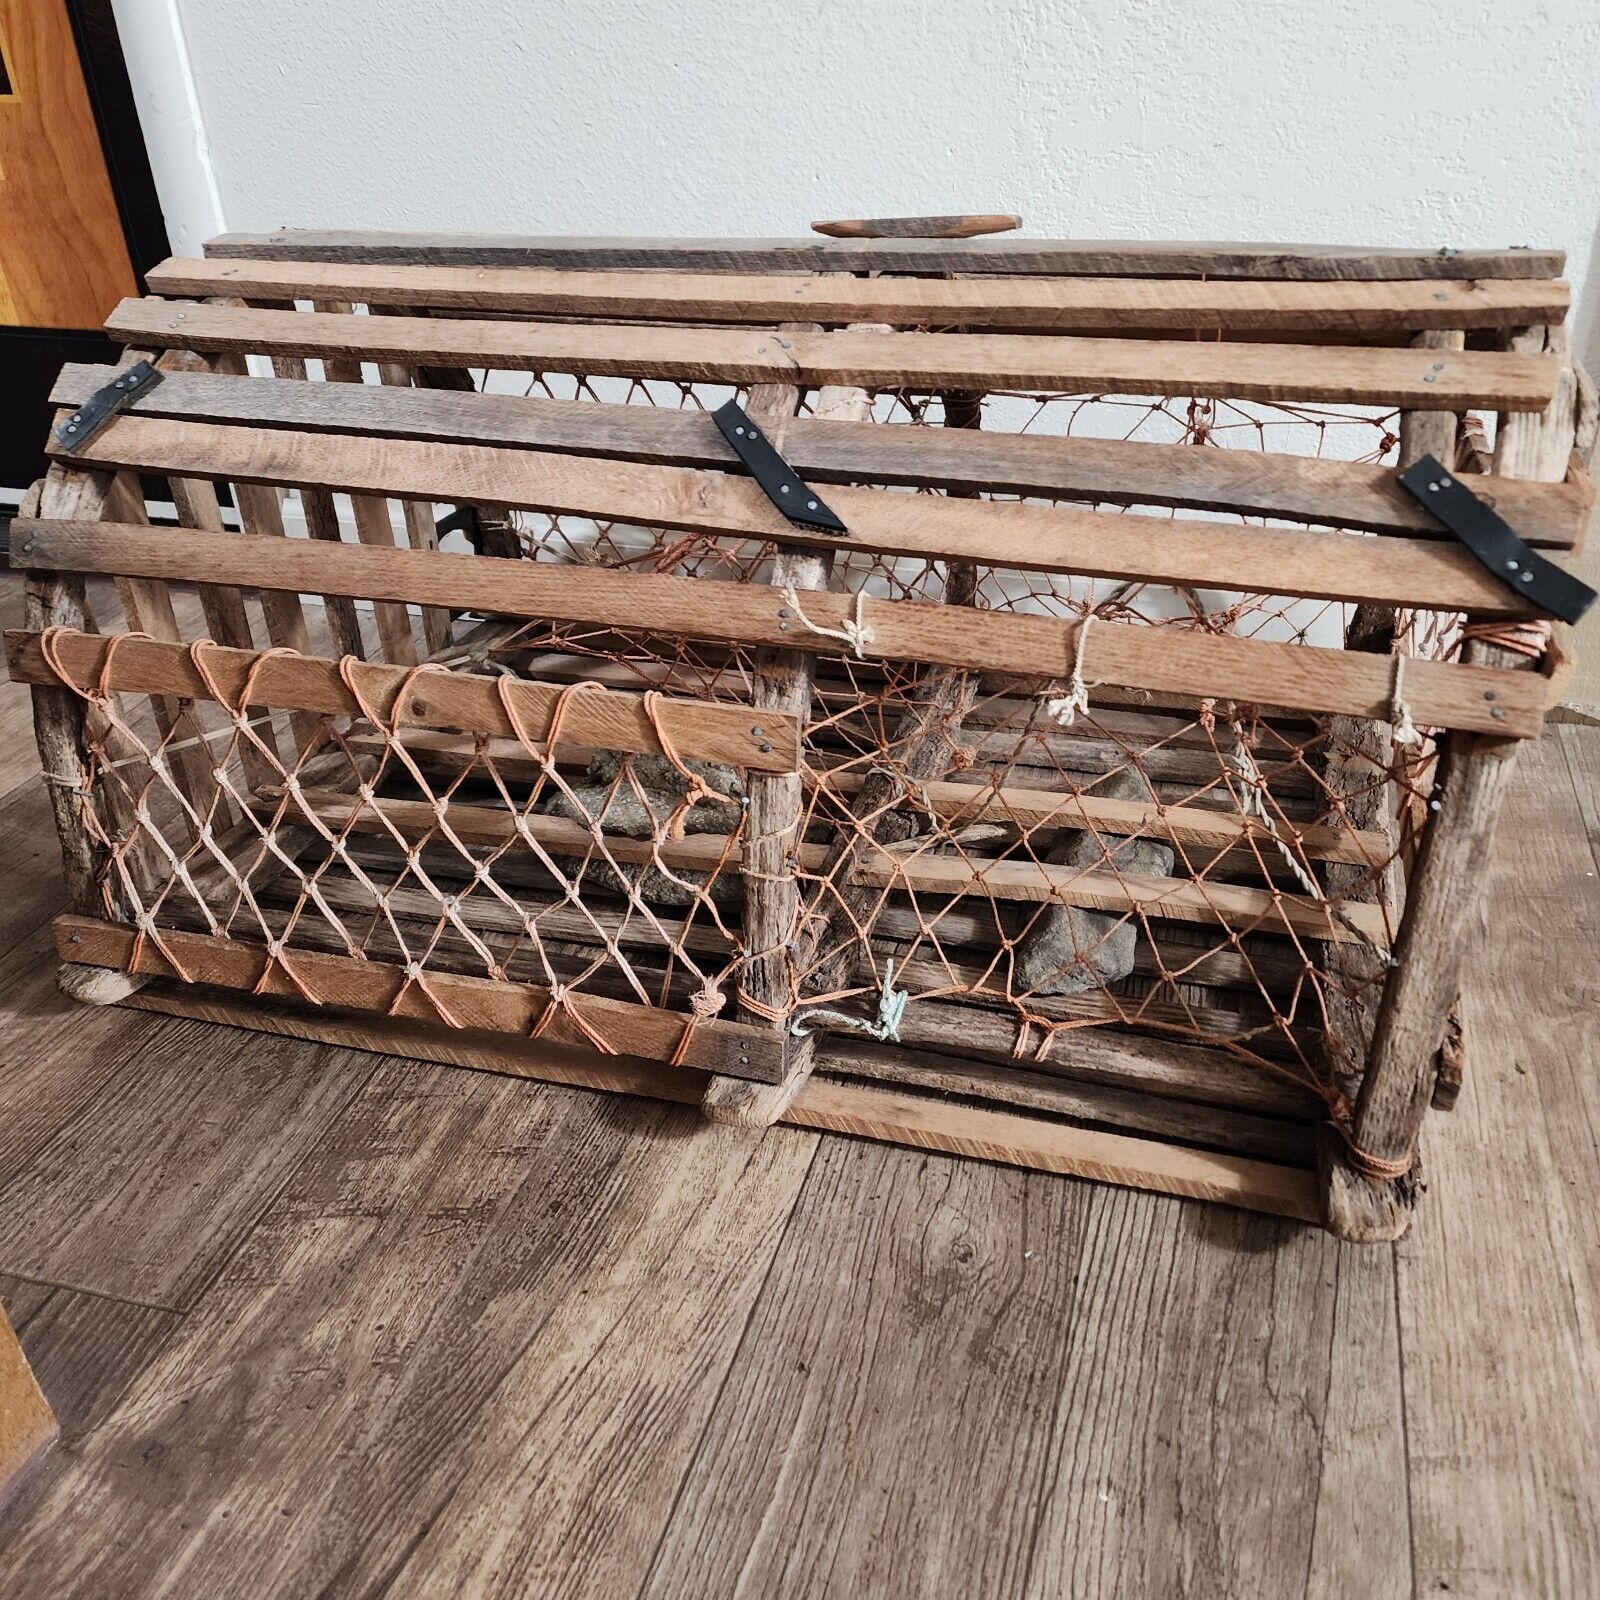 Vintage Lobster Crab Trap Rustic Weighted Working Decorative 33” x 24” x 17”